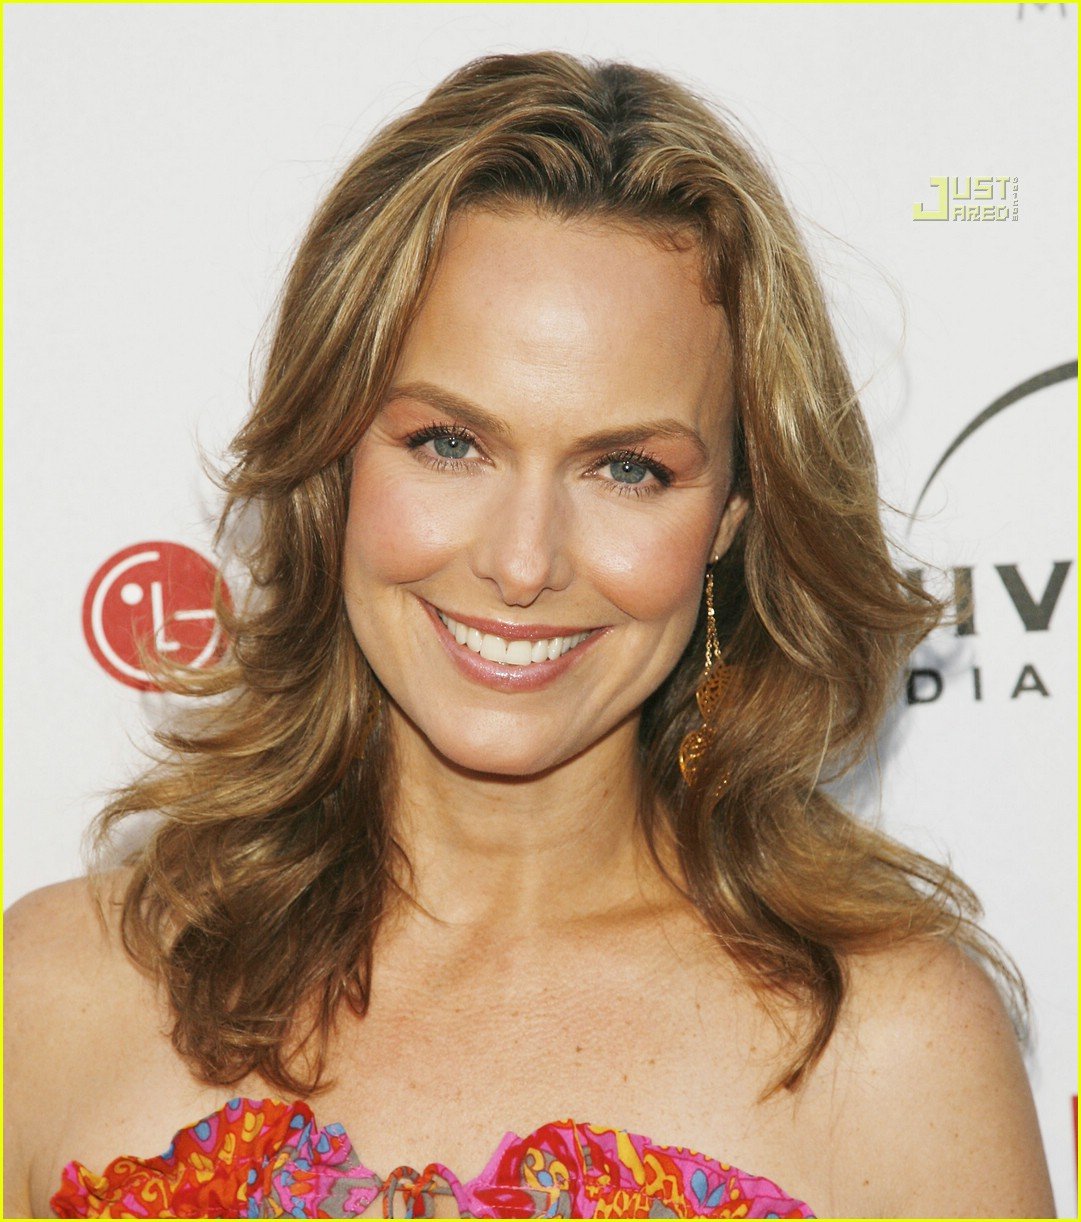 Full Sized Photo of melora hardin emmy party 02 Photo 519291 Just Jared.